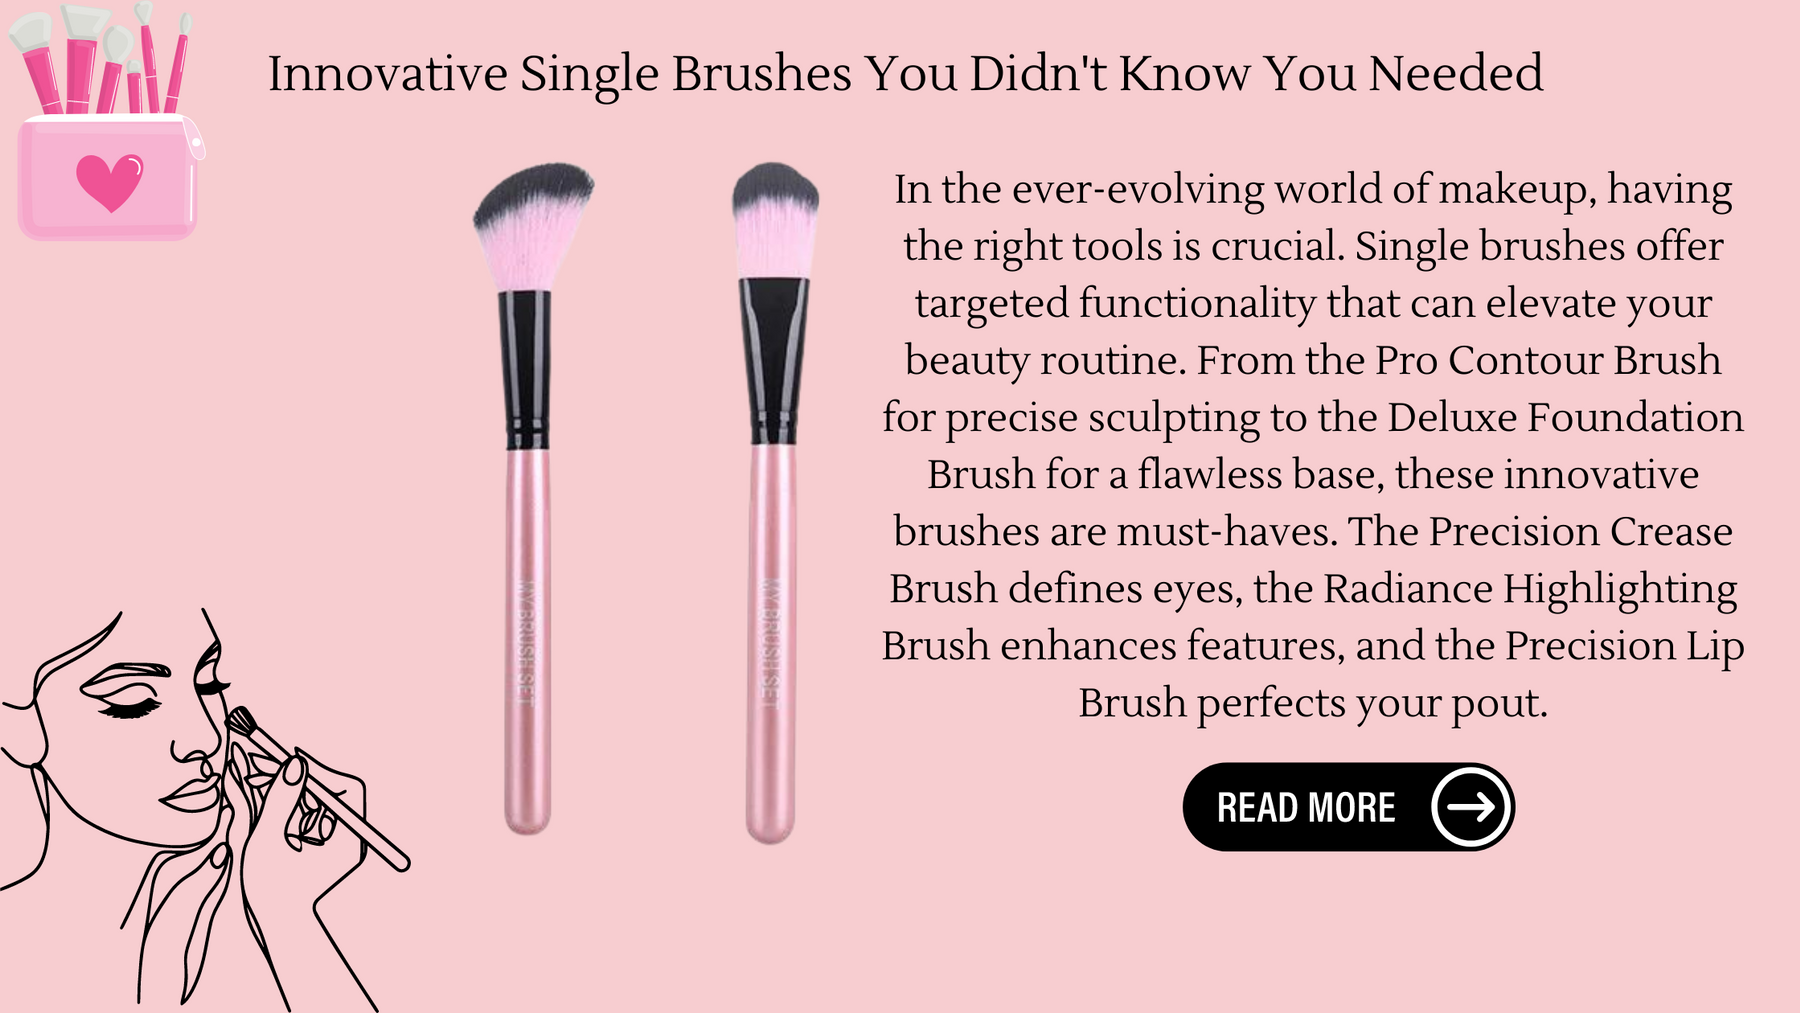 Innovative Single Brushes You Didn't Know You Needed